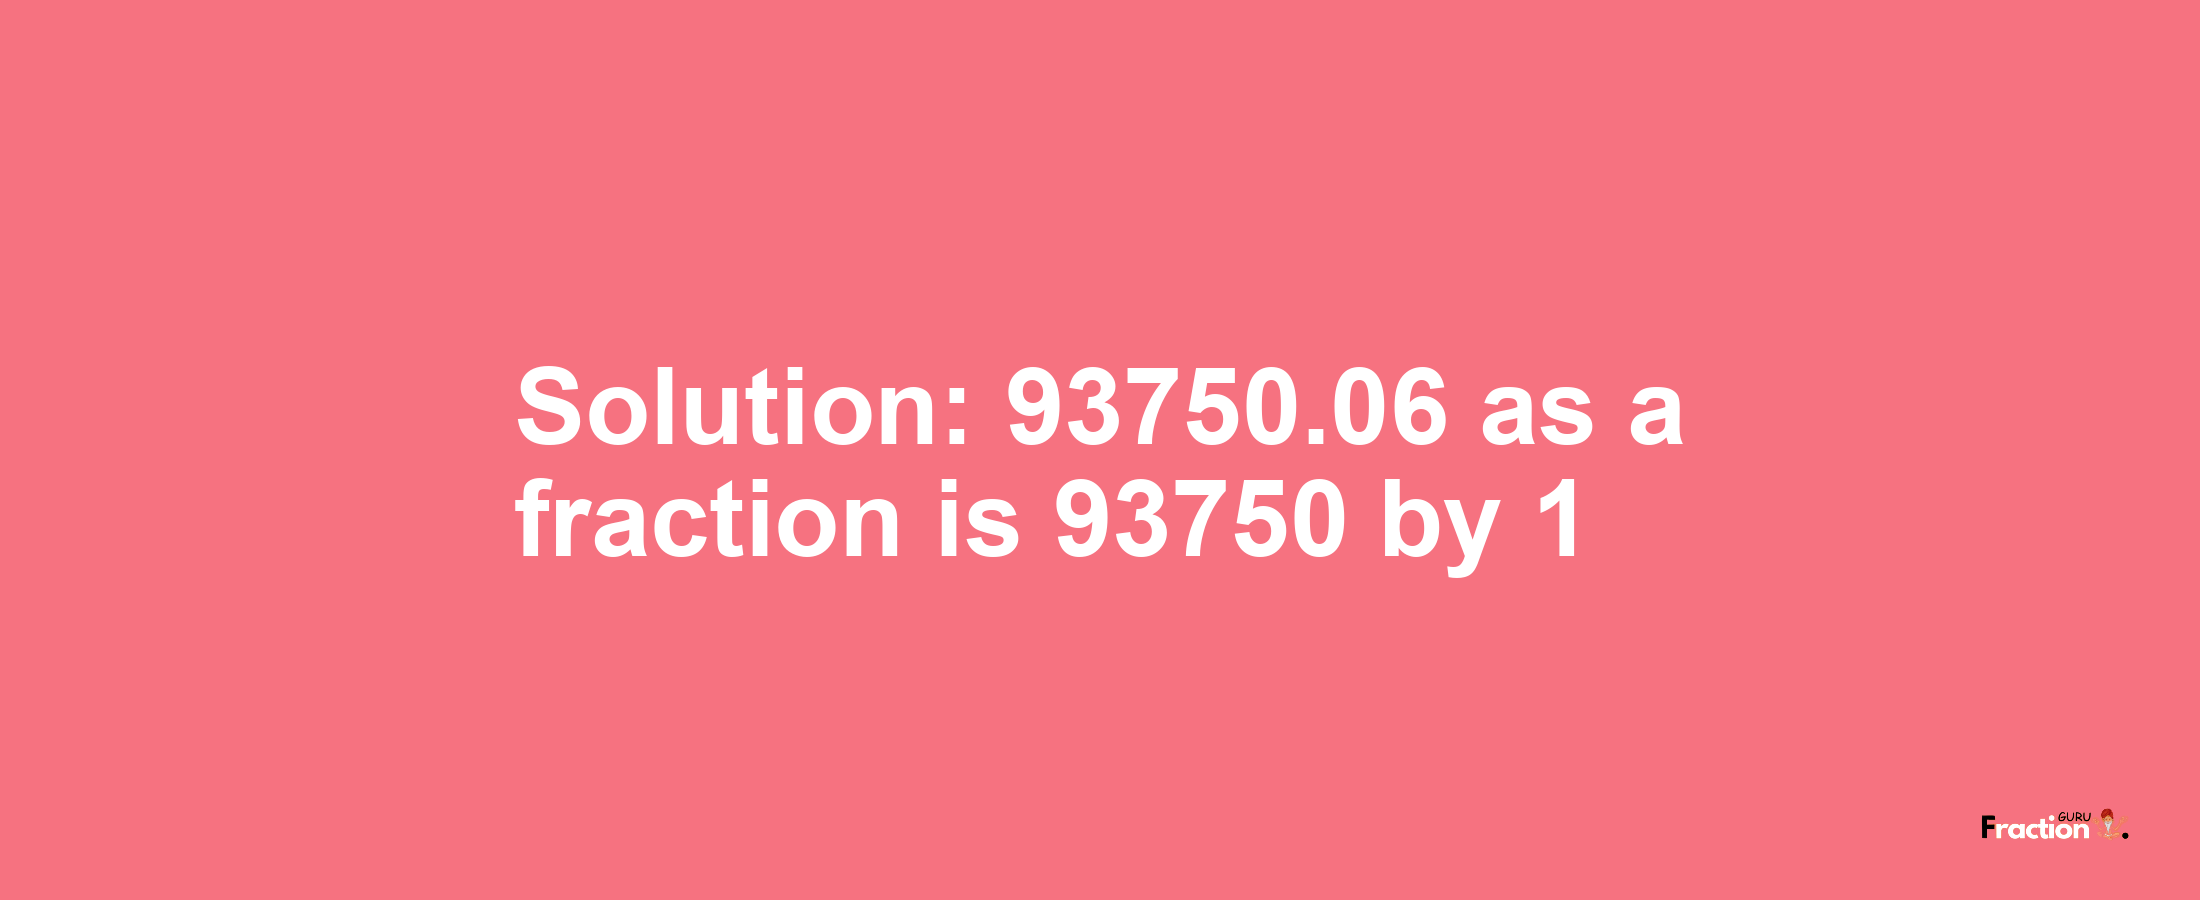 Solution:93750.06 as a fraction is 93750/1